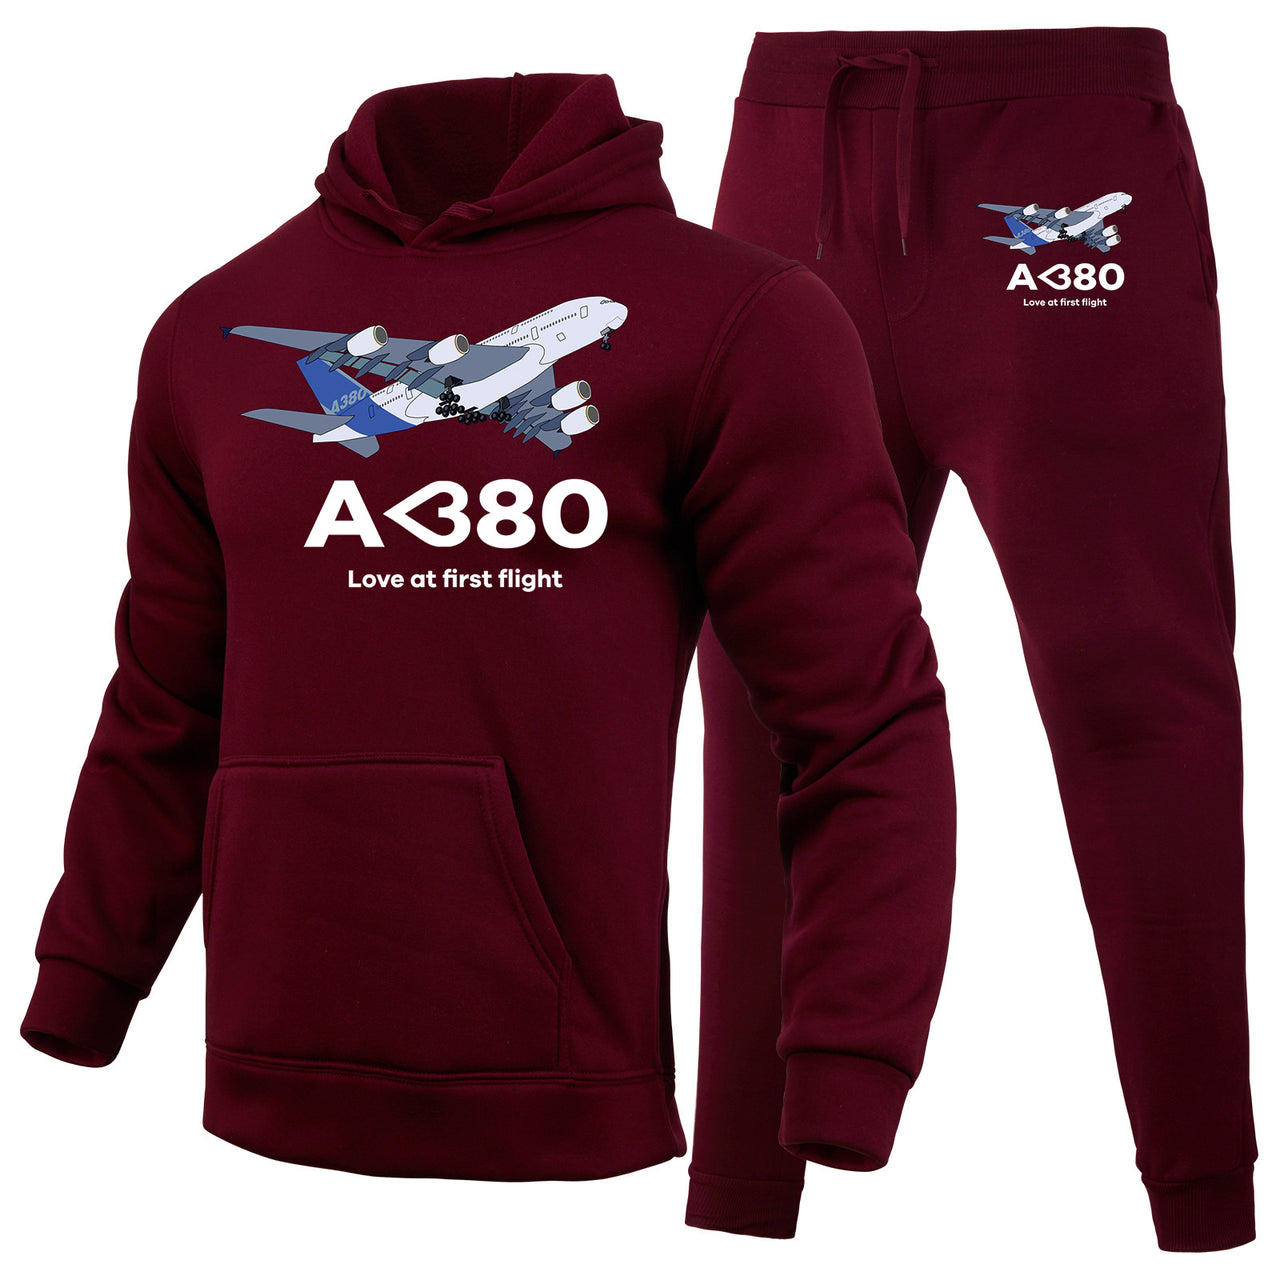 Airbus A380 Love at first flight Designed Hoodies & Sweatpants Set